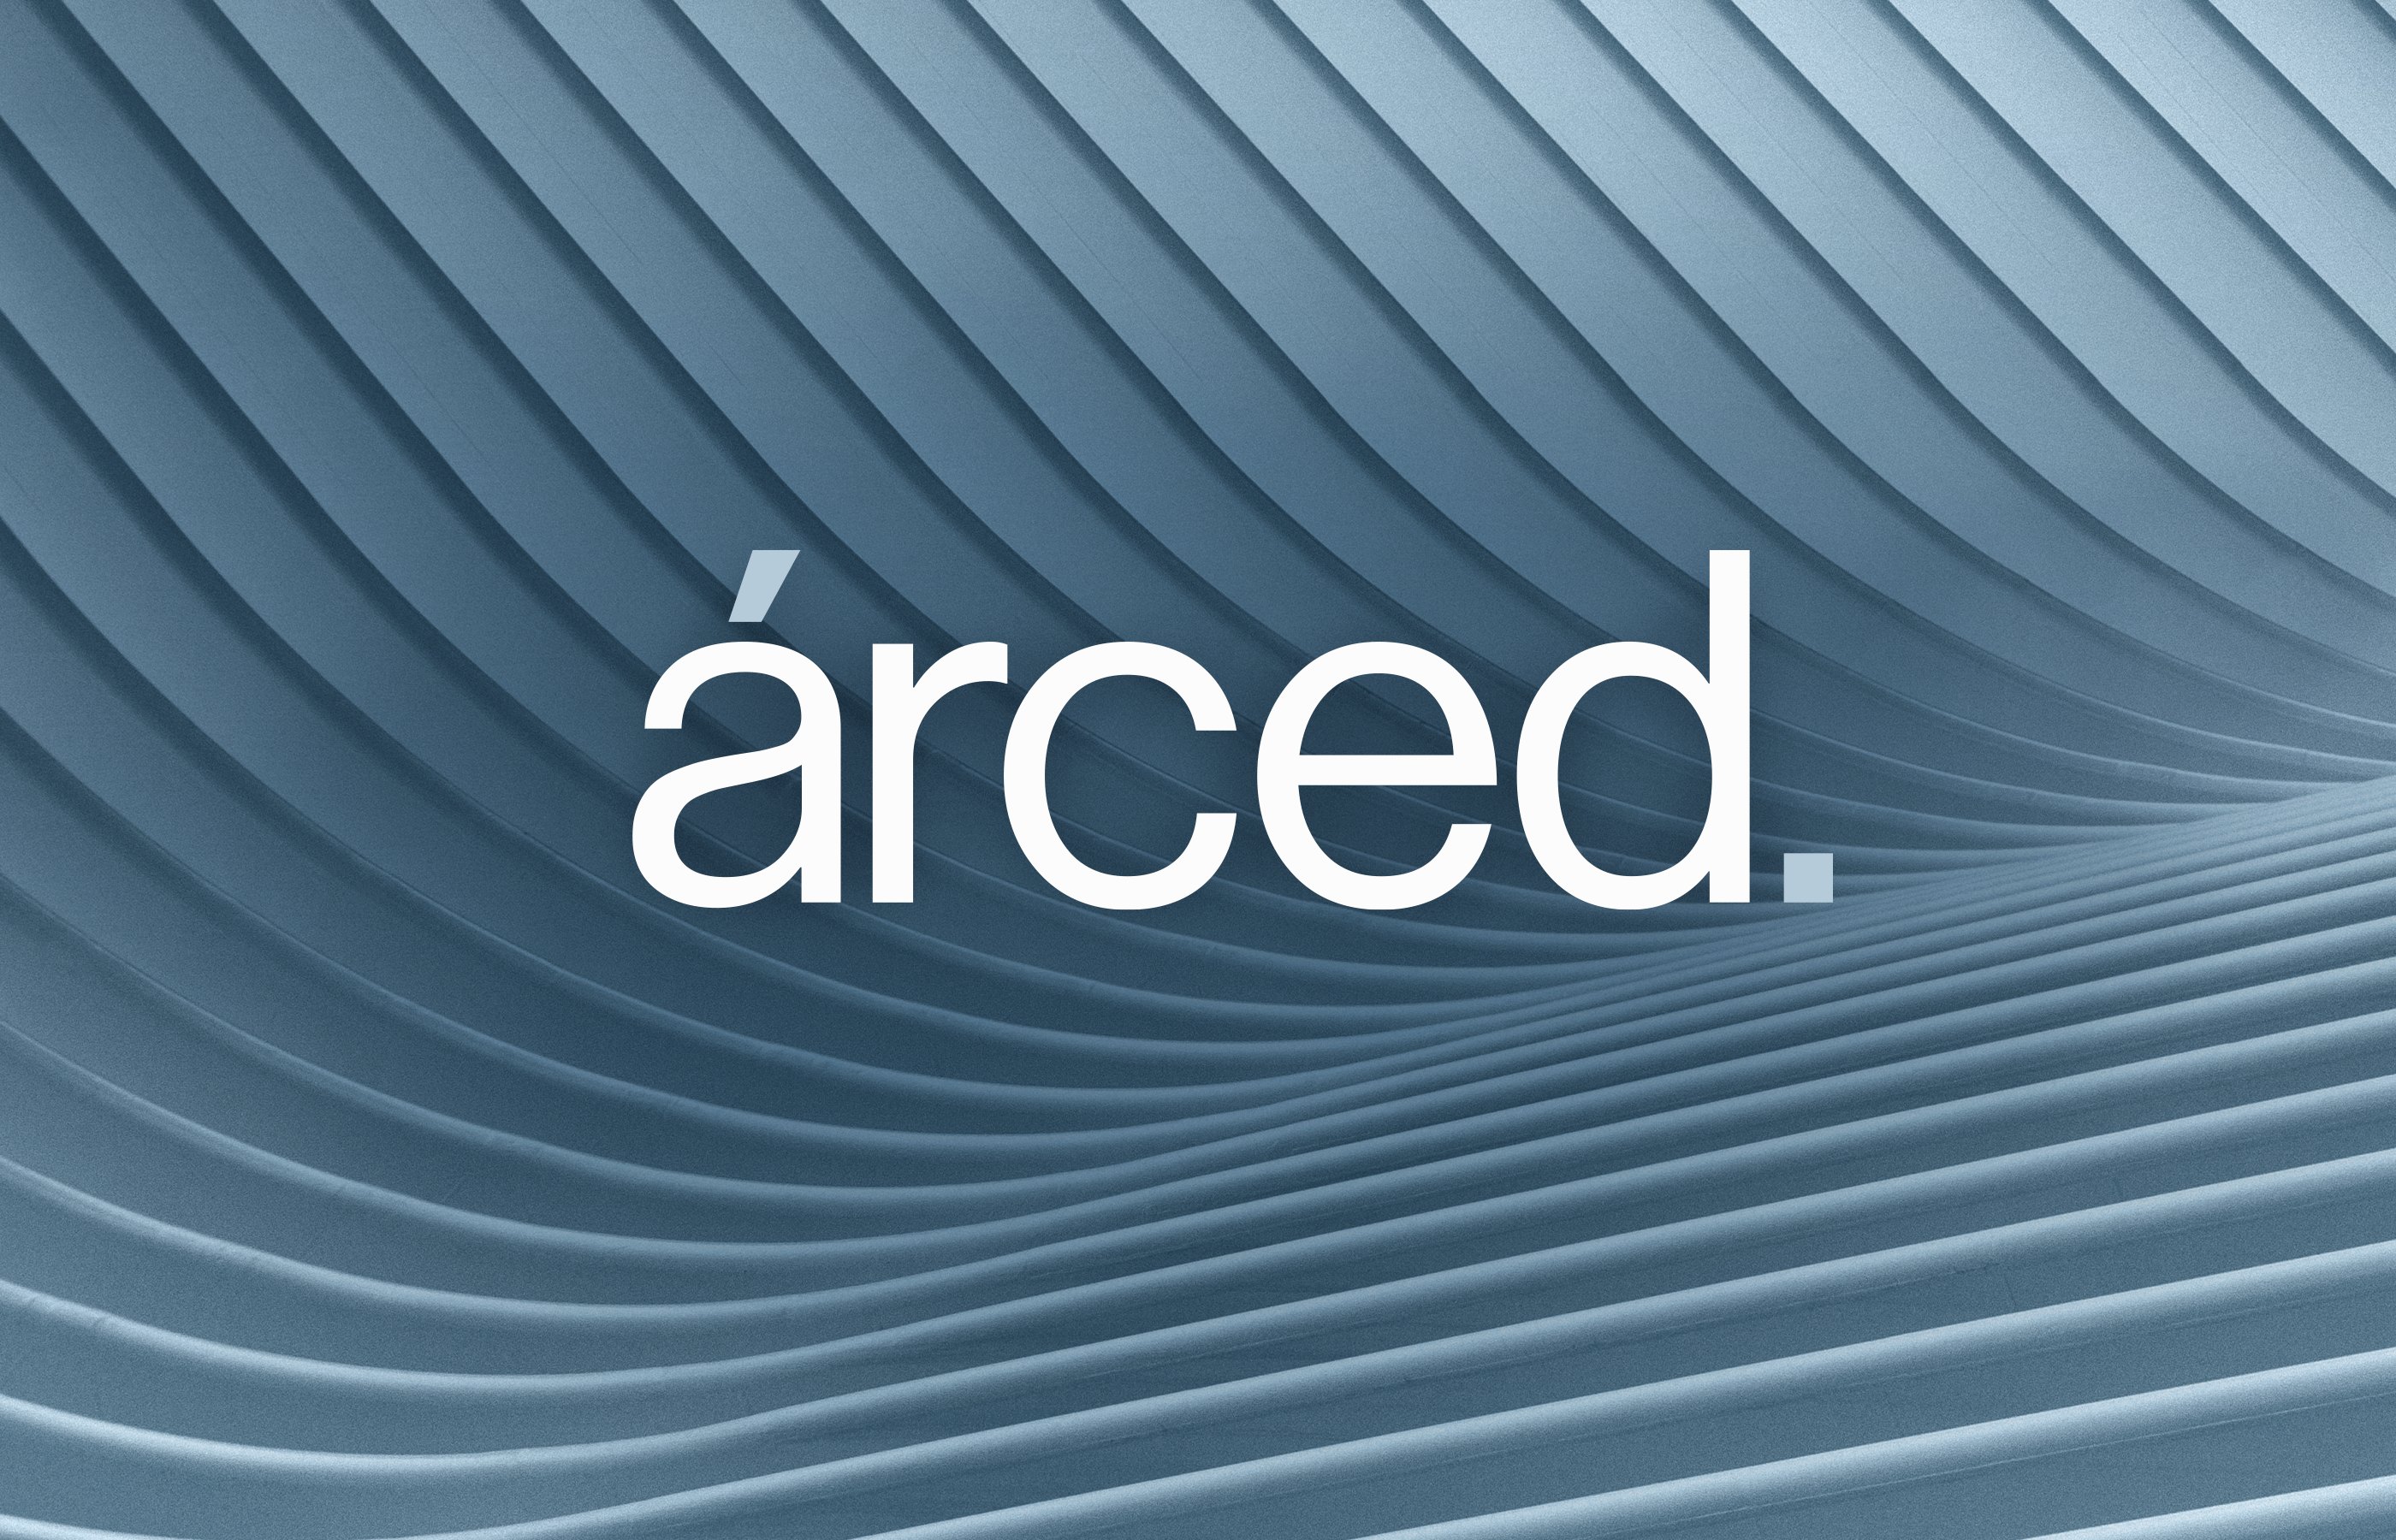 Stacy Saturday Studio’s Naming and Branding for Arced: Redefining Architectural Identity in the Fusion of Technology and Tradition